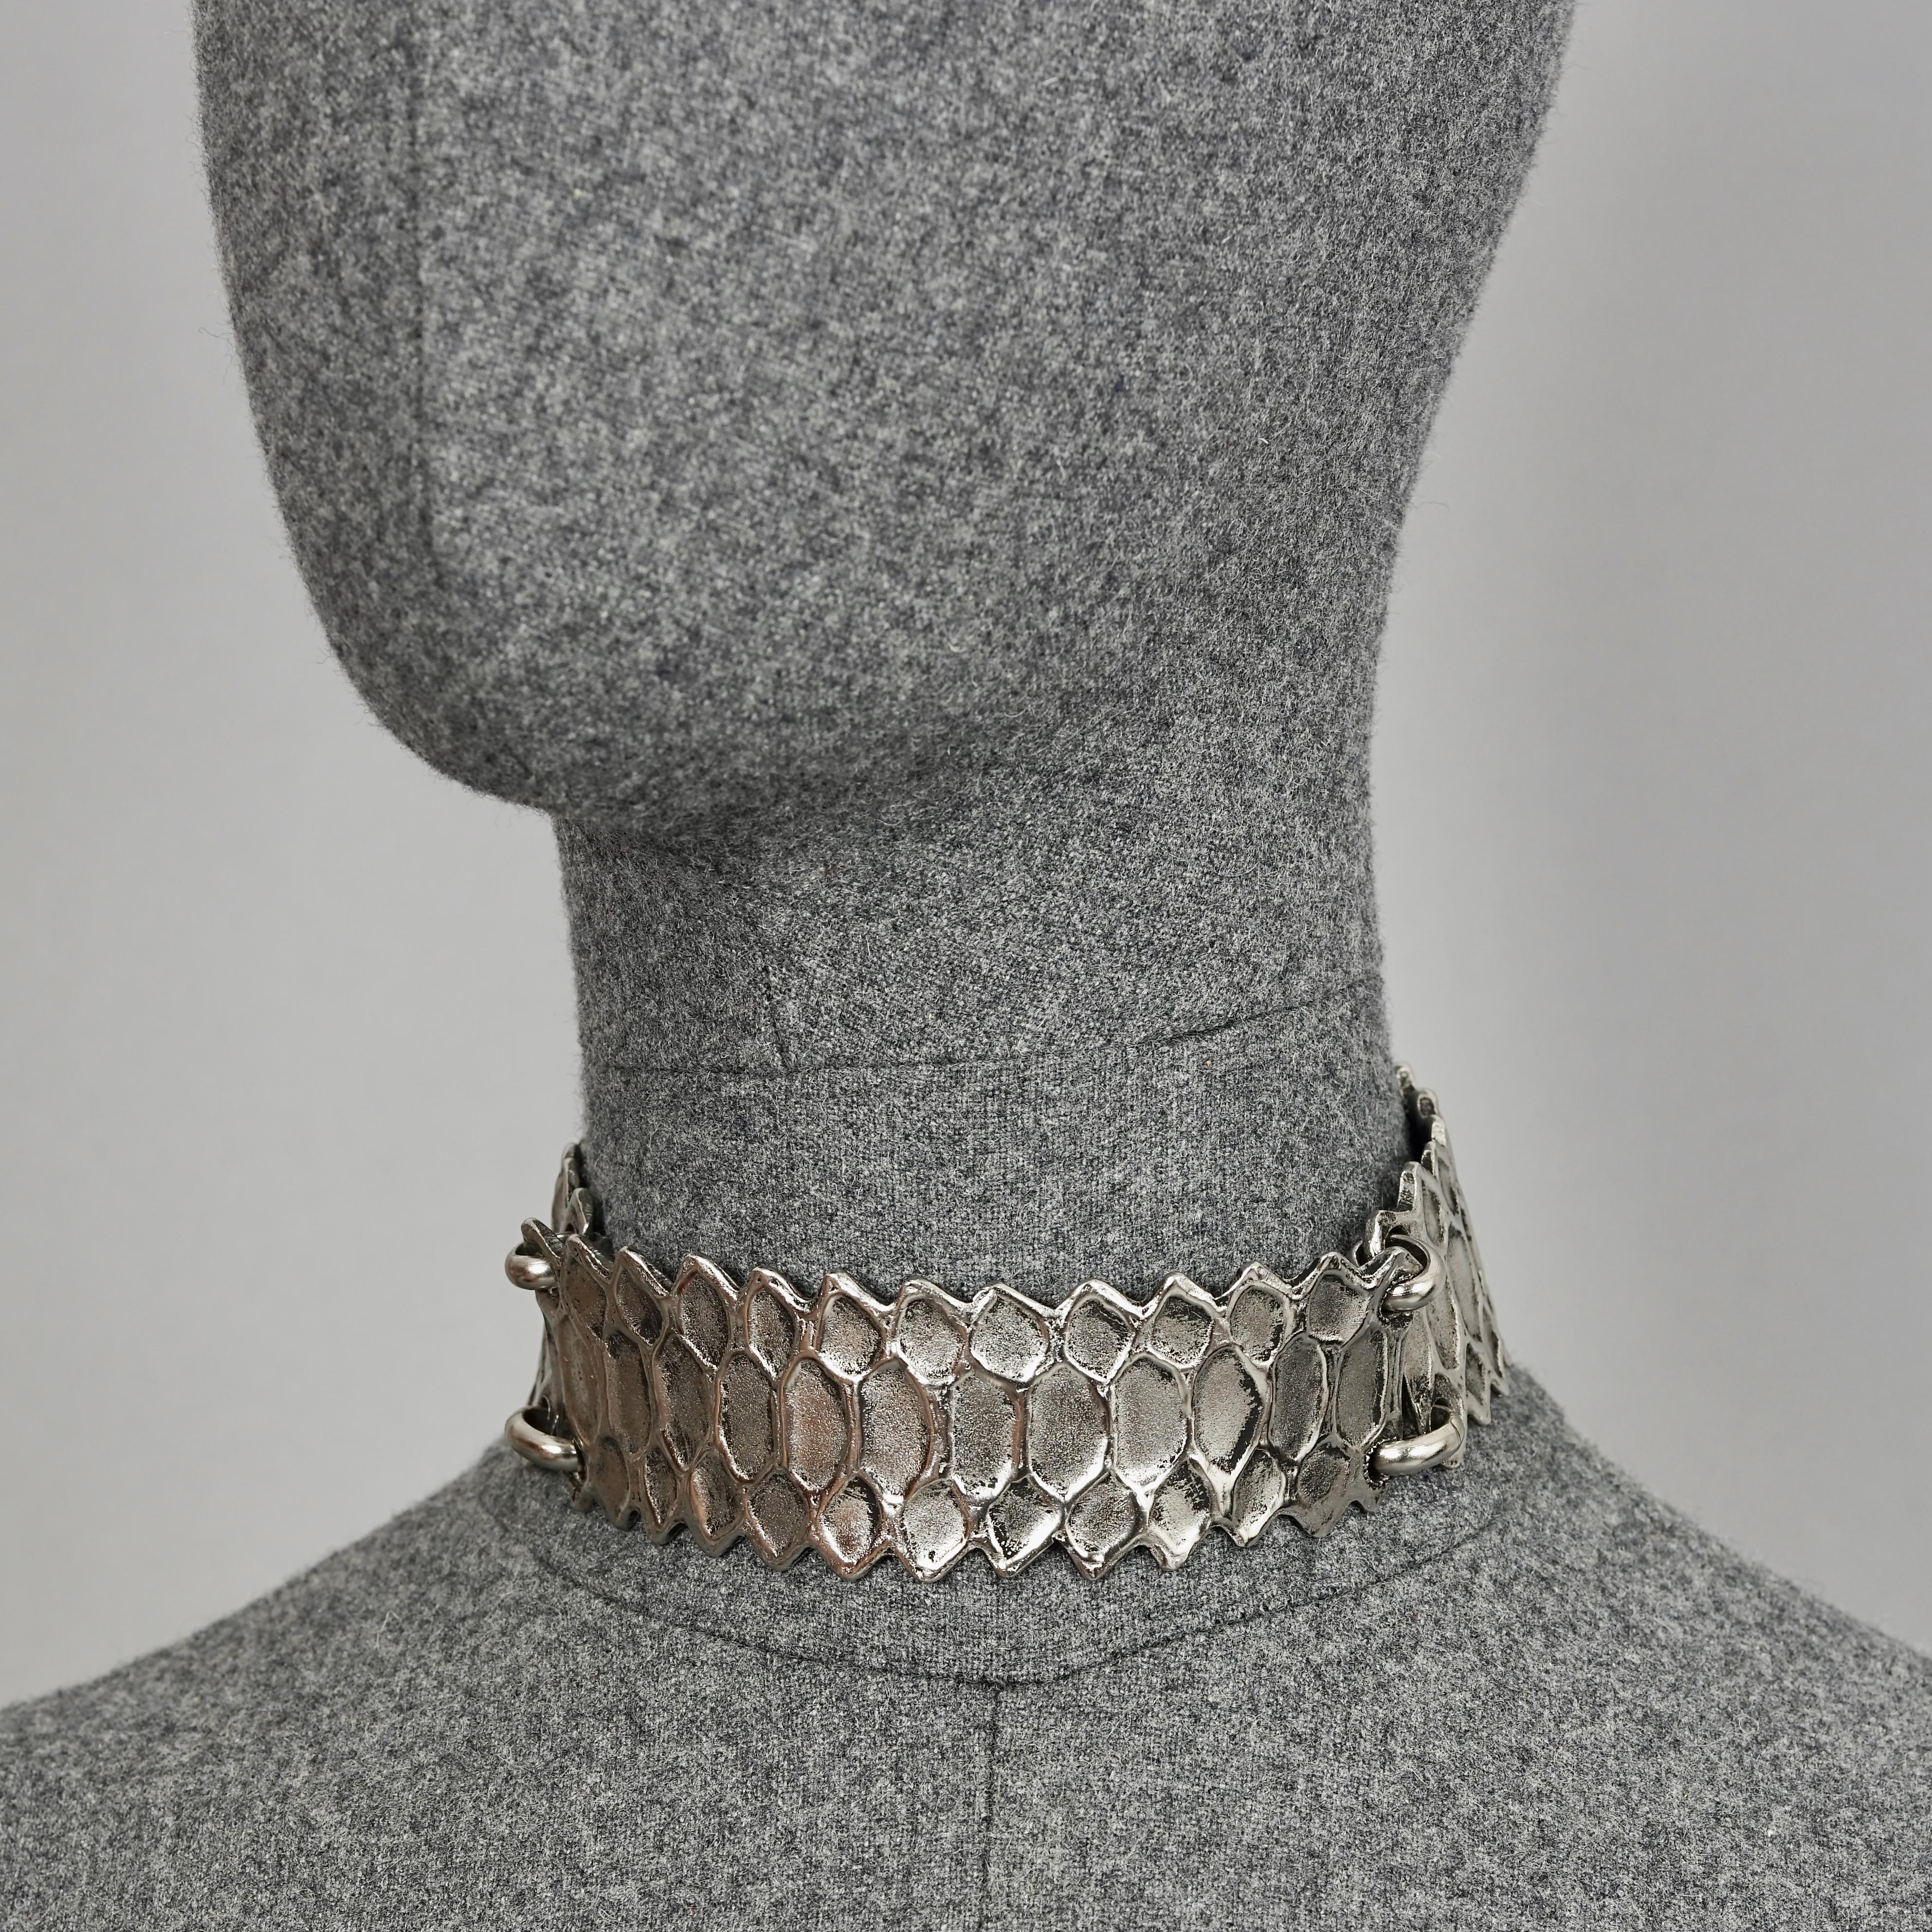 Vintage YVES SAINT LAURENT Ysl Snake Pattern Silver Choker Necklace

Measurements:
Height: 1.45 inches (3.7 cm)
Wearable Length: 11.41 inches (29 cm) to 13.38 inches (34 cm)

Features:
- 100% Authentic YVES SAINT LAURENT.
- Textured articulated